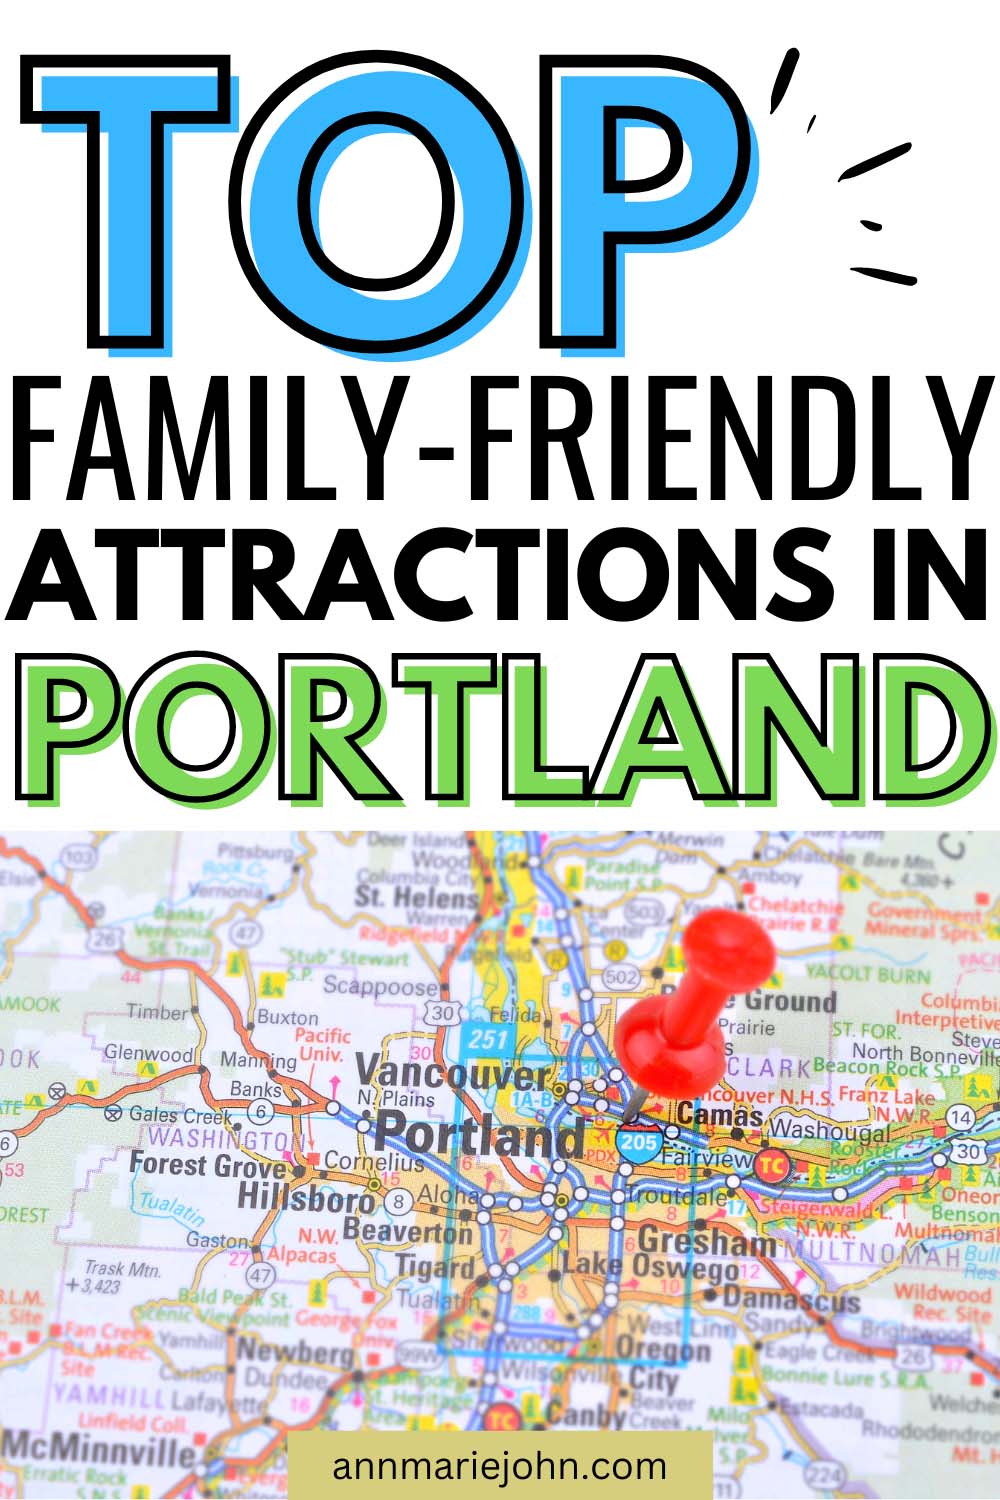 Top Family-Friendly Attractions in Portland